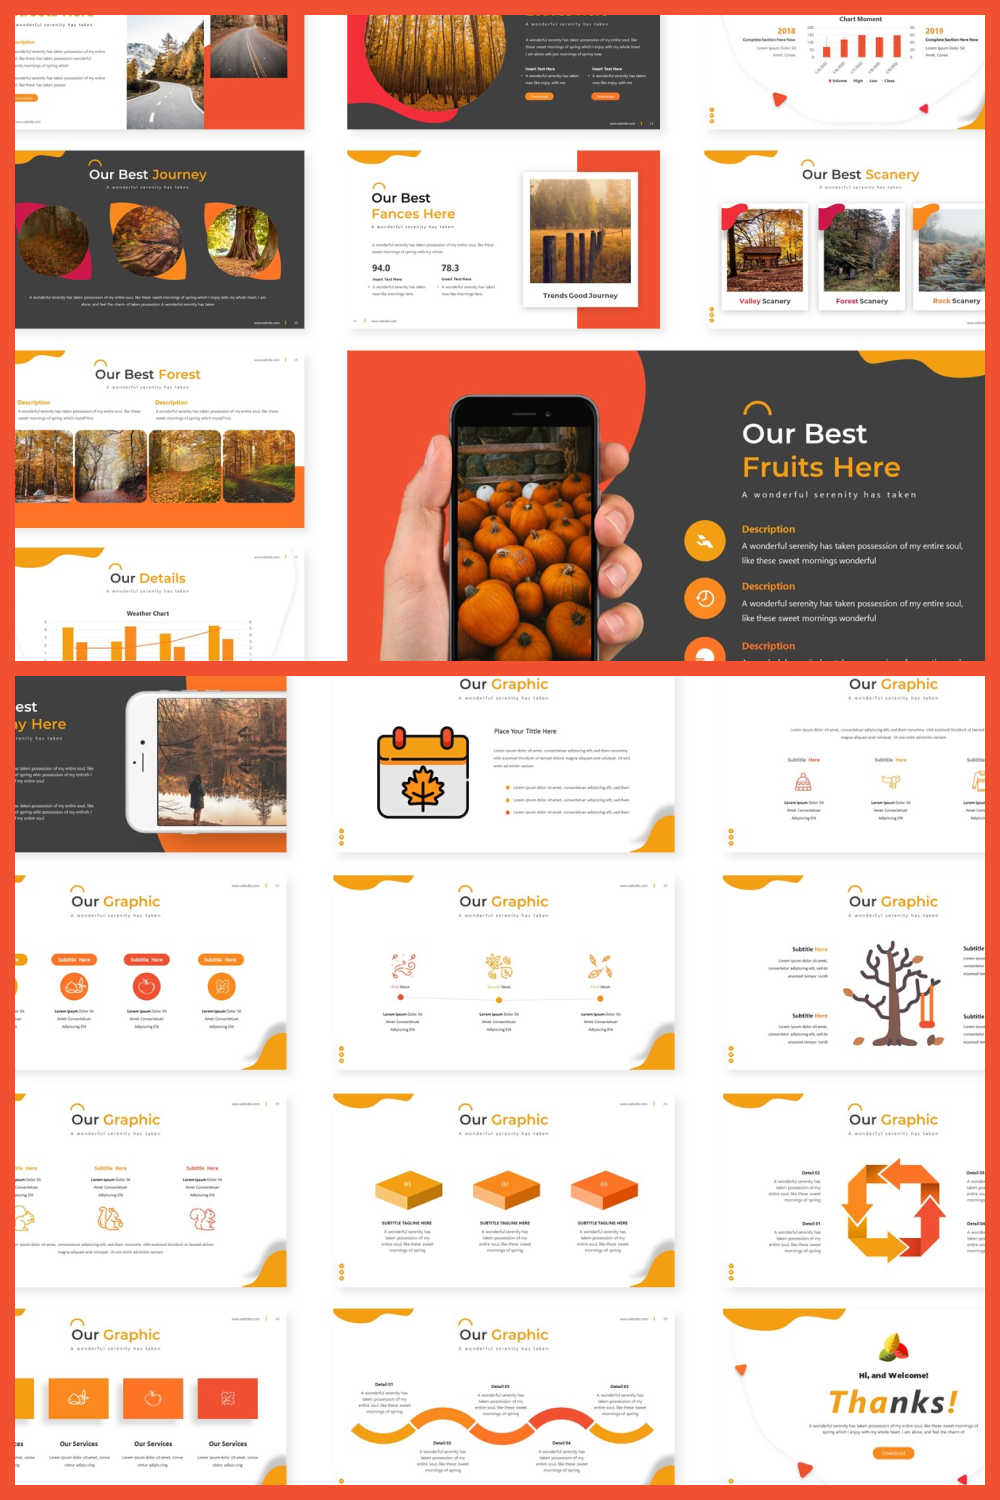 Collage of screenshots of presentation pages with infographics and harvest photos.